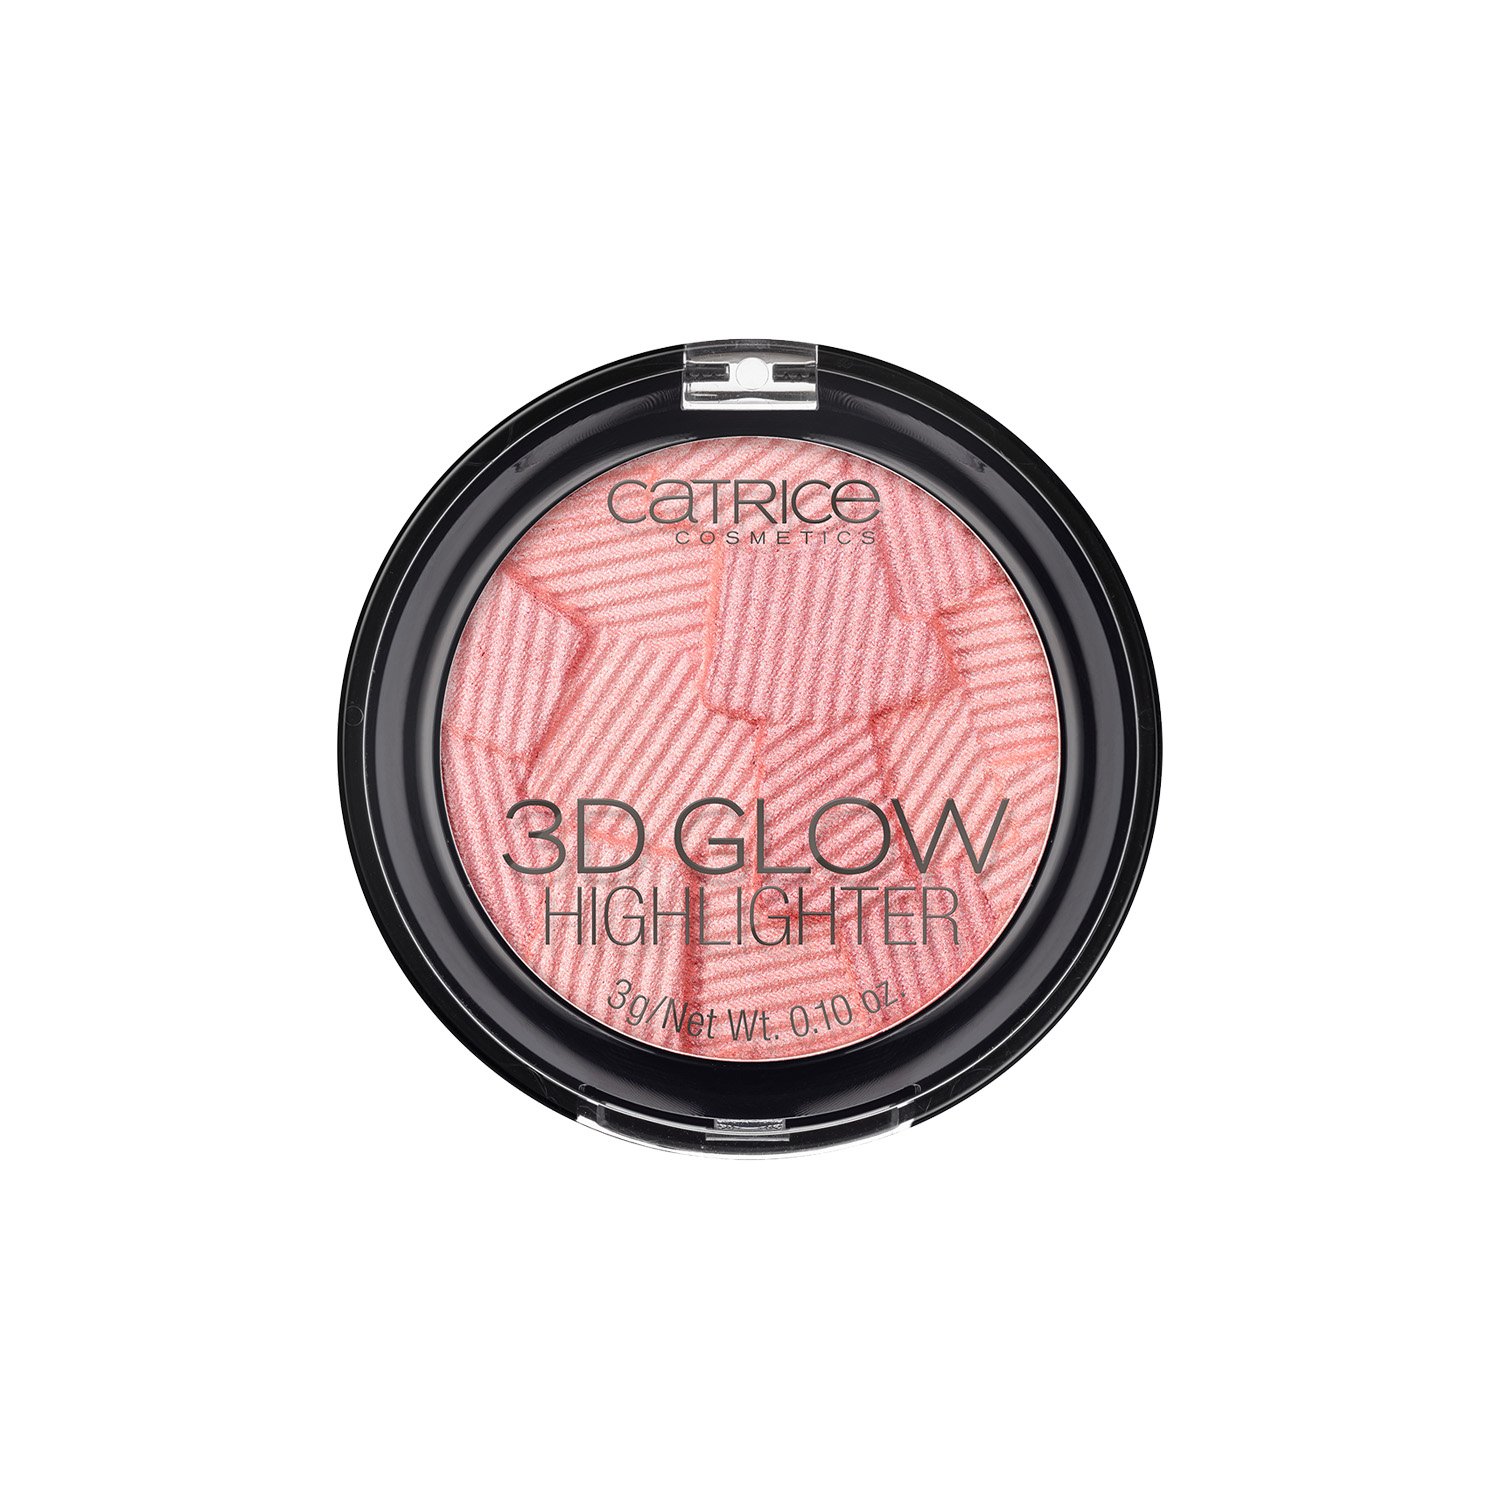 Catrice 3D Glow Highlighter 010